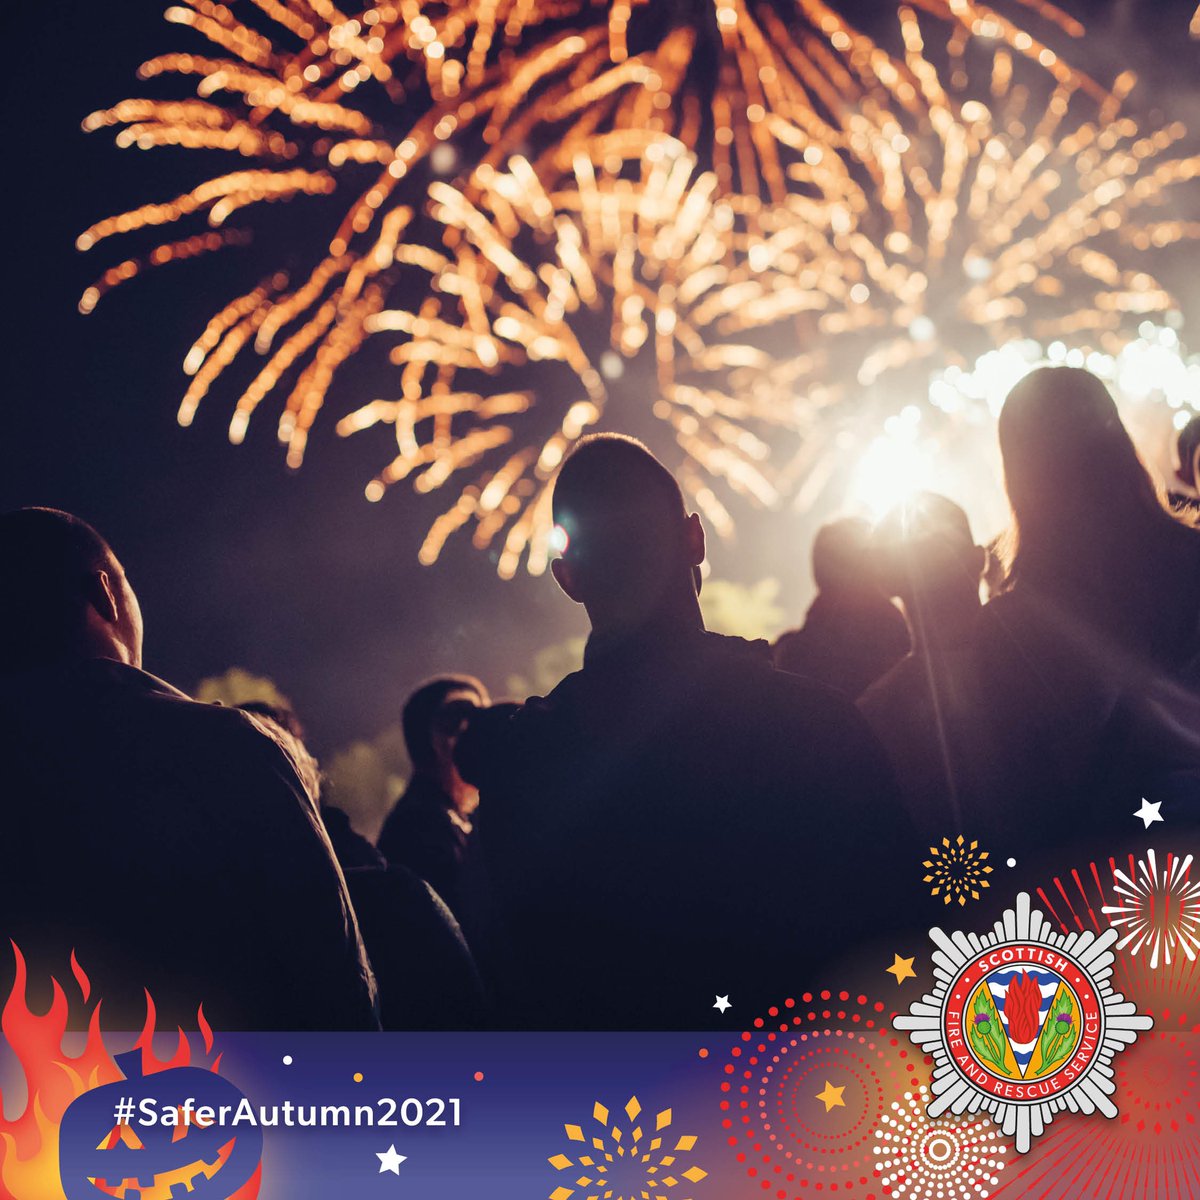 Planning on hosting a back-garden bonfire🔥 or buying fireworks🎆?  
 
Please consider the risks as the consequences can be devastating.  

Attend an organised display if possible - SFRS website has a list of public events.  

➡️ firescotland.gov.uk/your-safety/fi… 

 #SaferAutumn2021